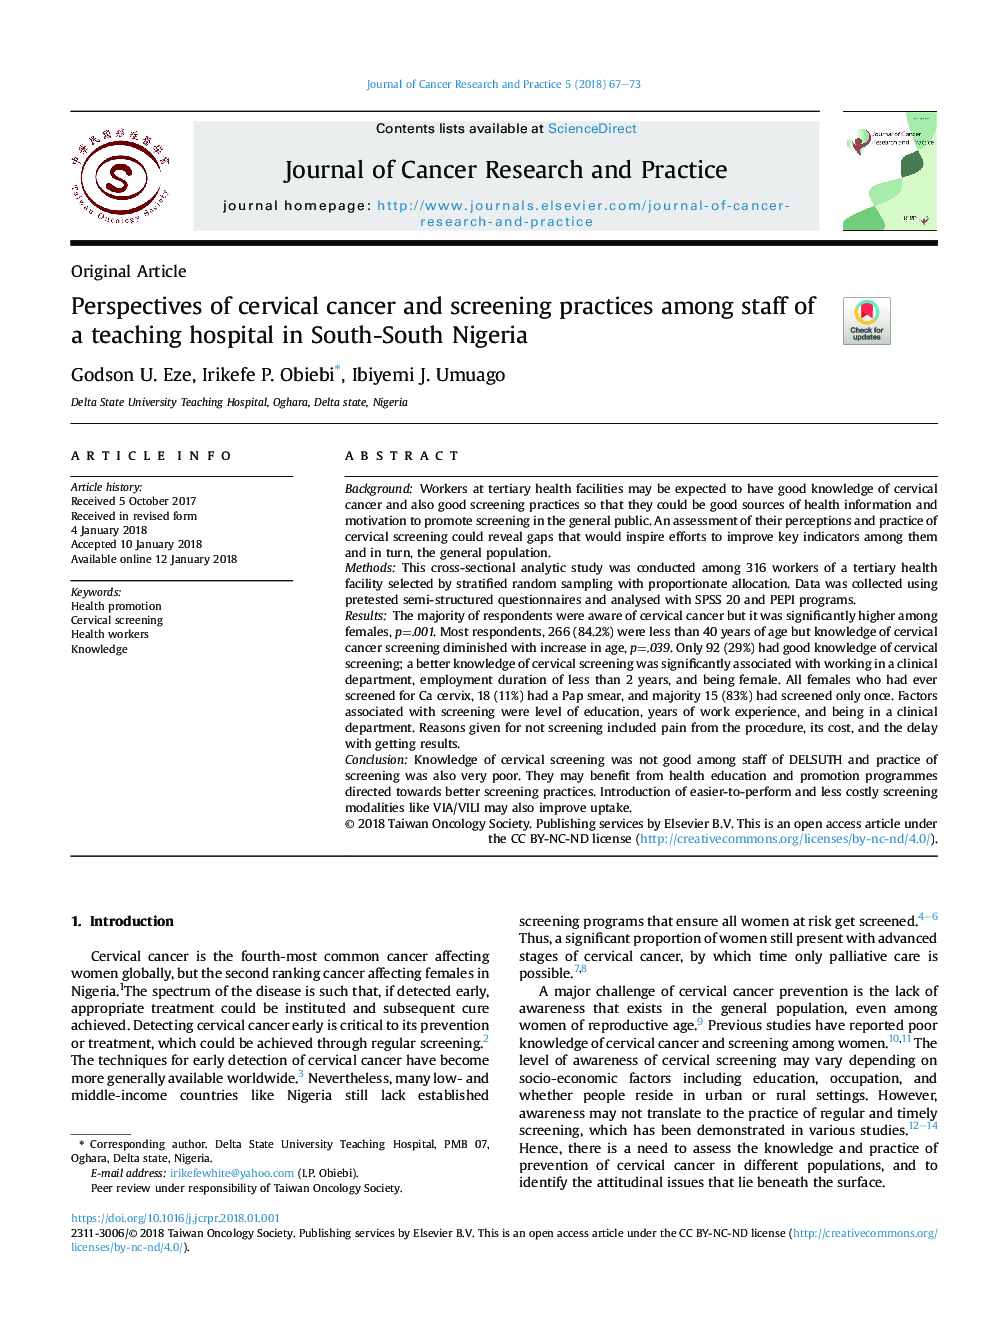 Perspectives of cervical cancer and screening practices among staff of a teaching hospital in South-South Nigeria